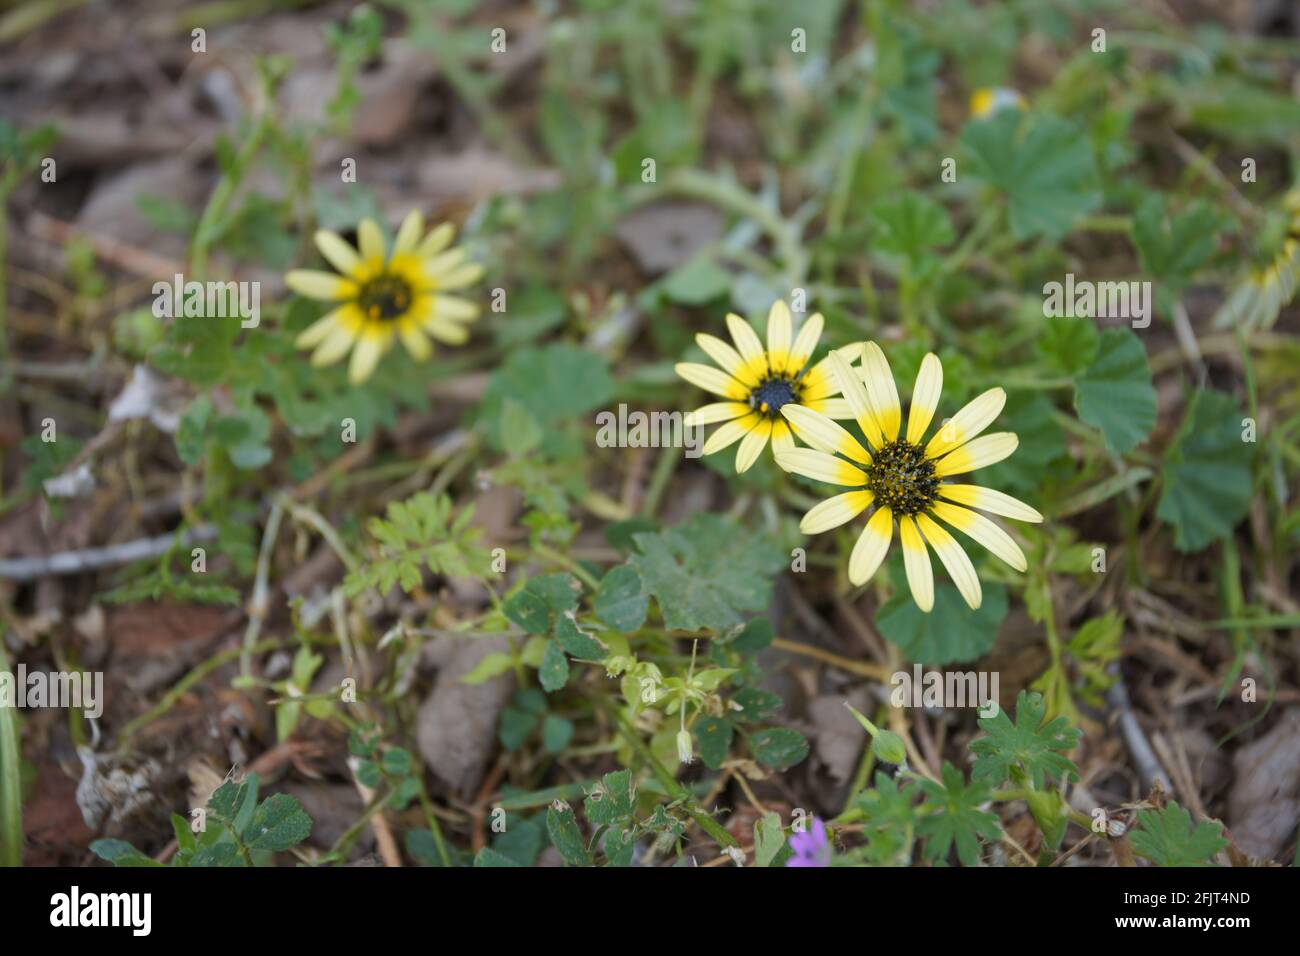 A cluster of Golden Aster flowers in a garden Stock Photo